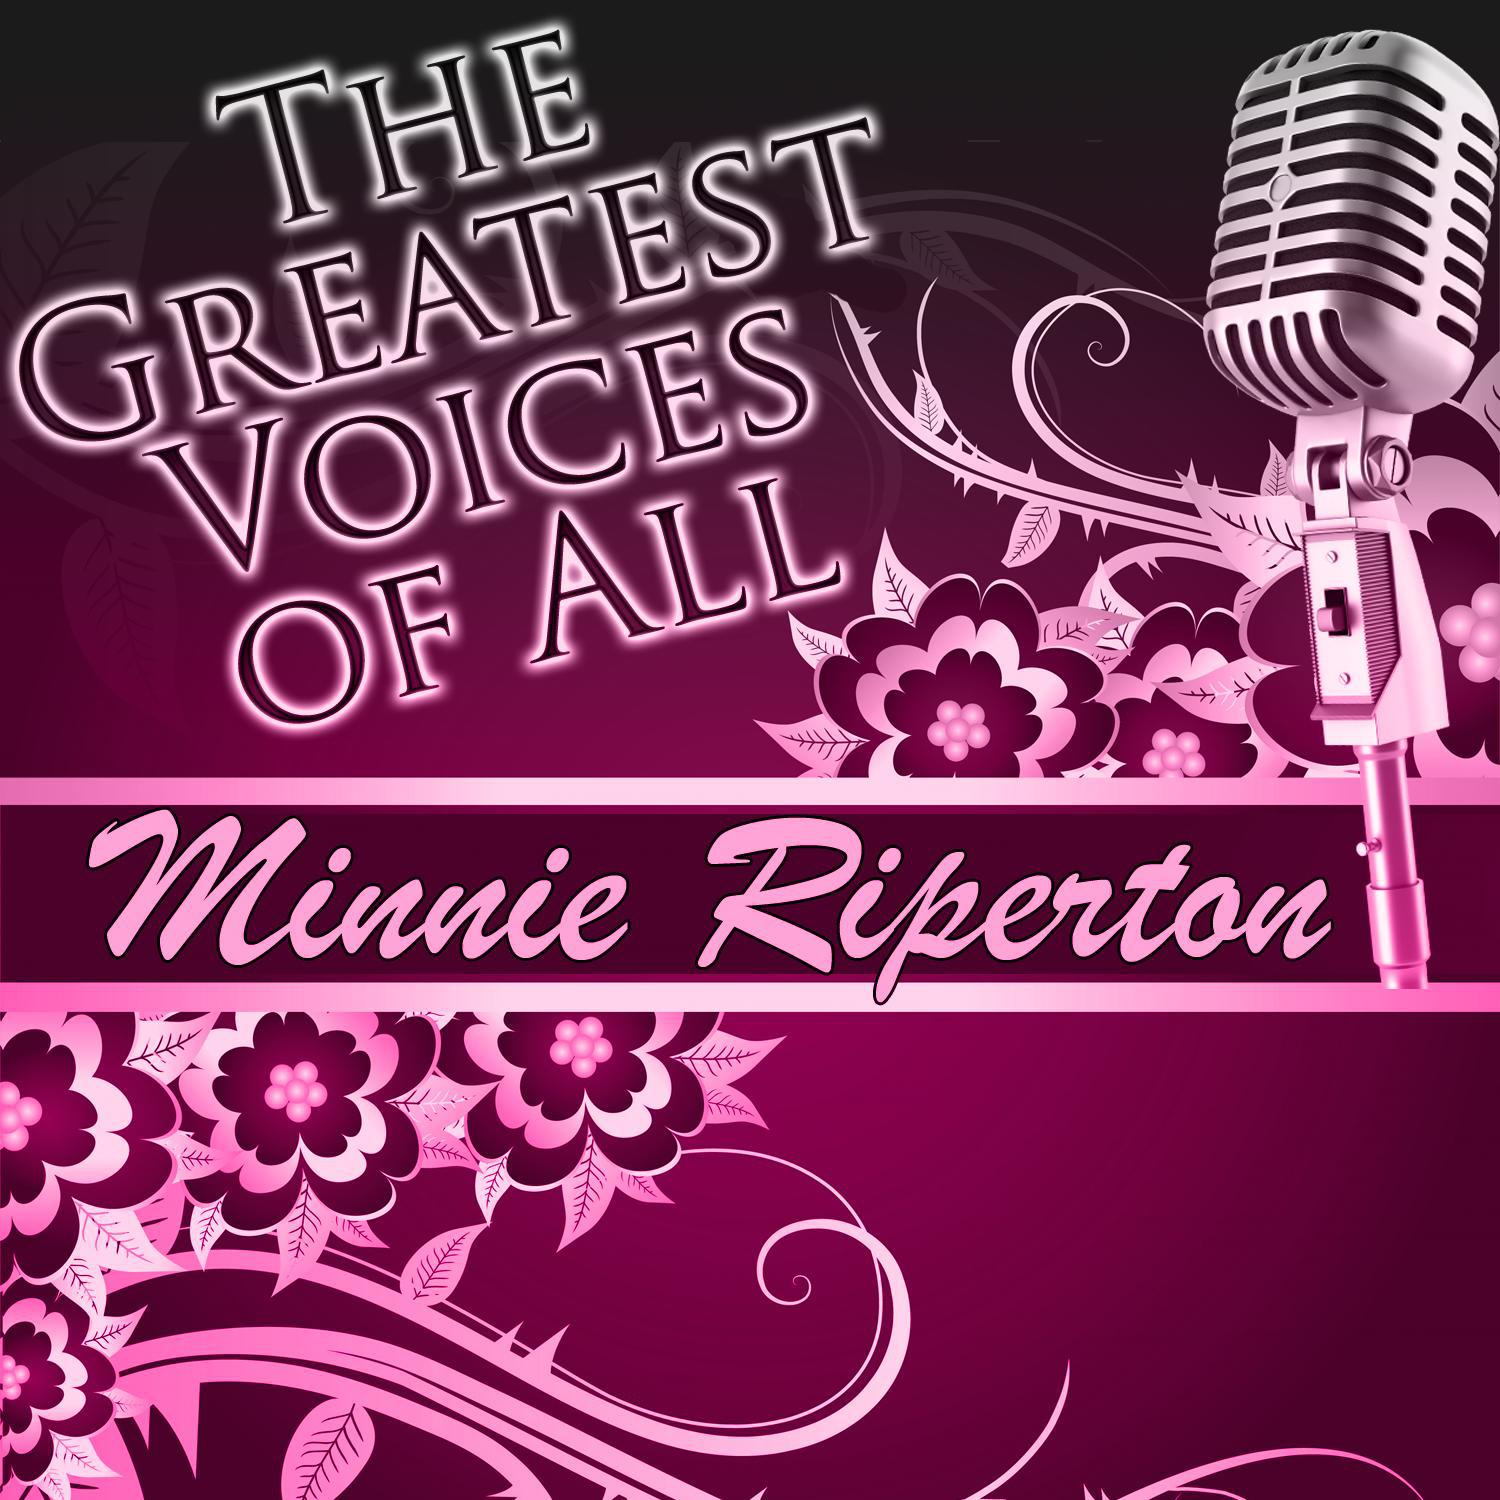 The Greatest Voices of All: Minnie Riperton